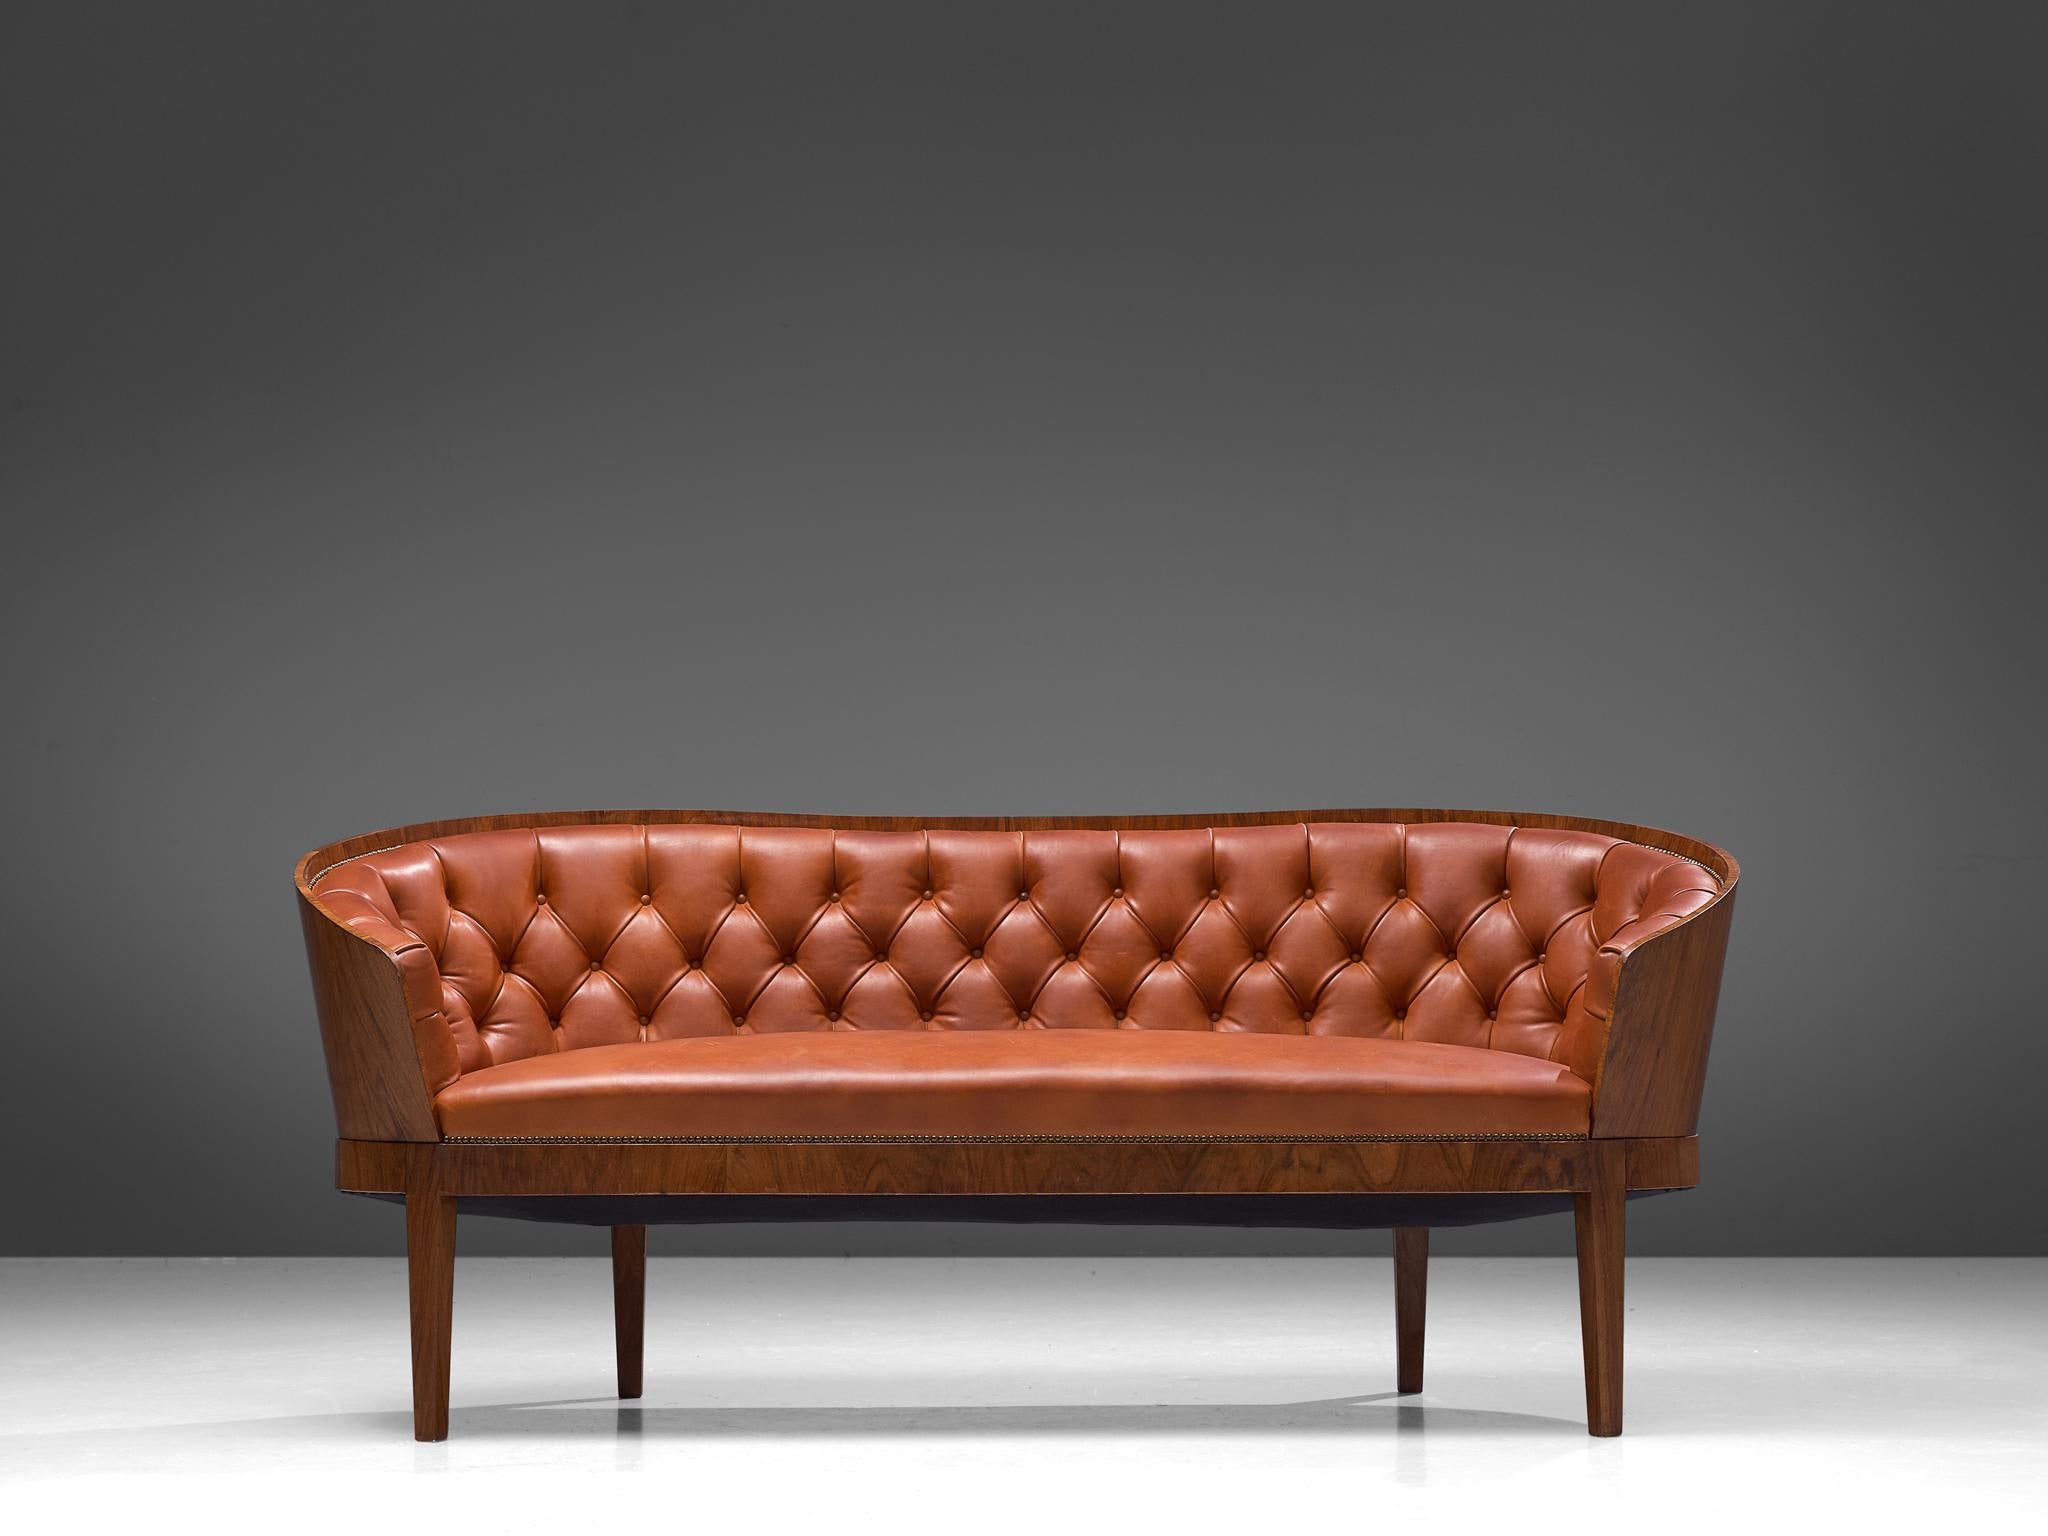 John Thorson, sofa, walnut and leather, Denmark, 1920s

A beautiful Danish sofa executed with a walnut frame and upholstered in warm red leather. What makes this sofa so special is the rounded walnut frame that surrounds the user. The leather